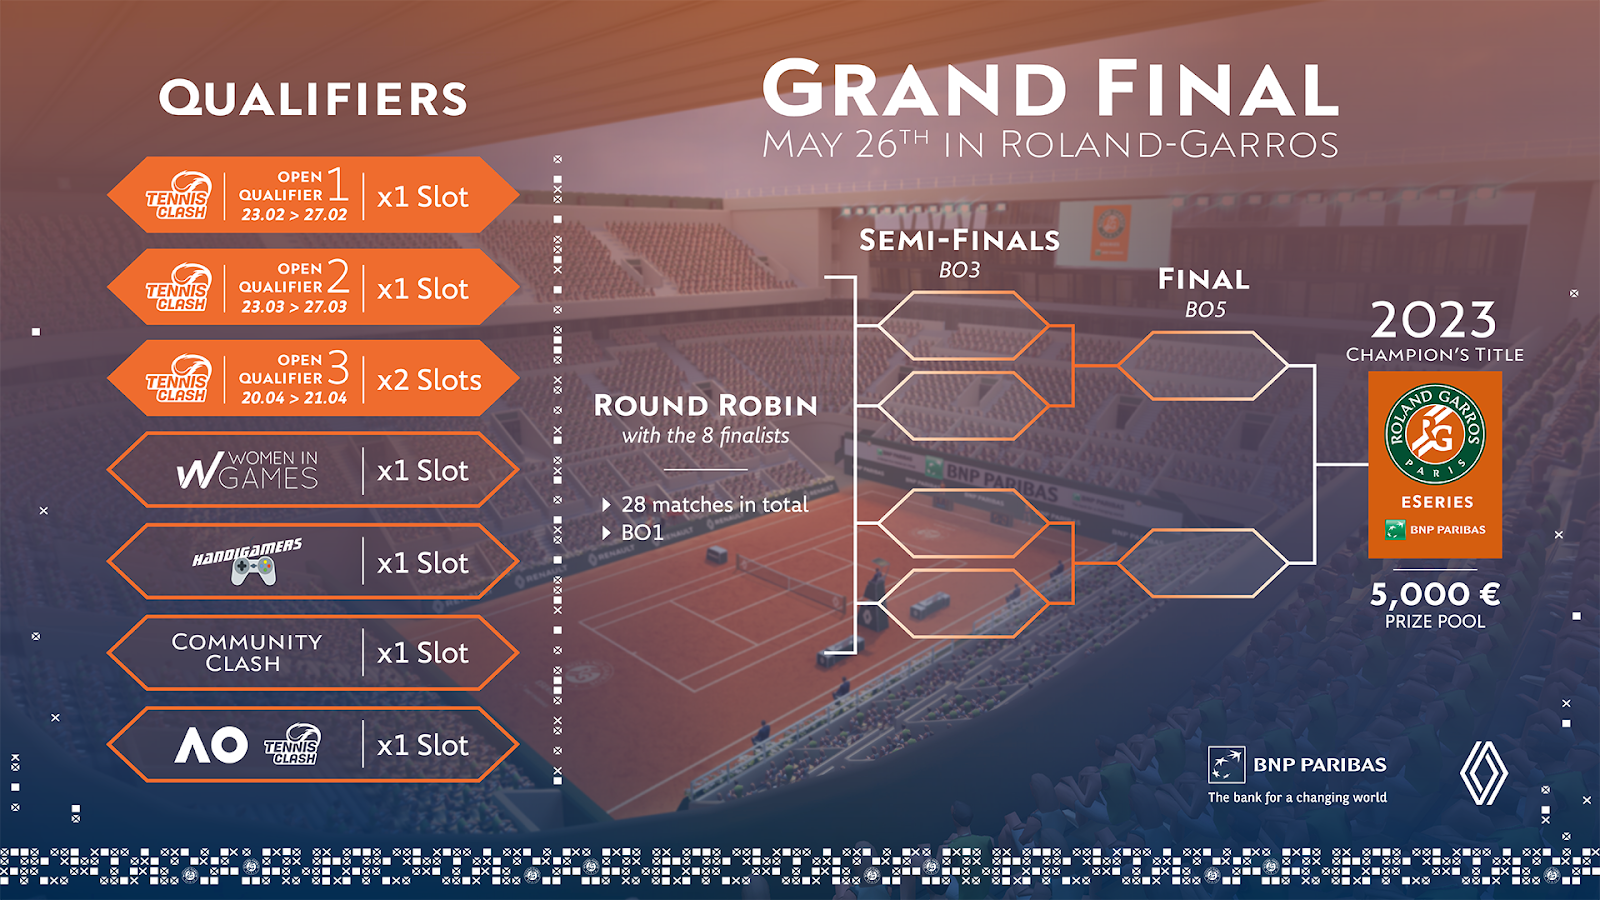 Roland-Garros eSeries by BNP Paribas is going to hold the world’s largest eTennis tournament